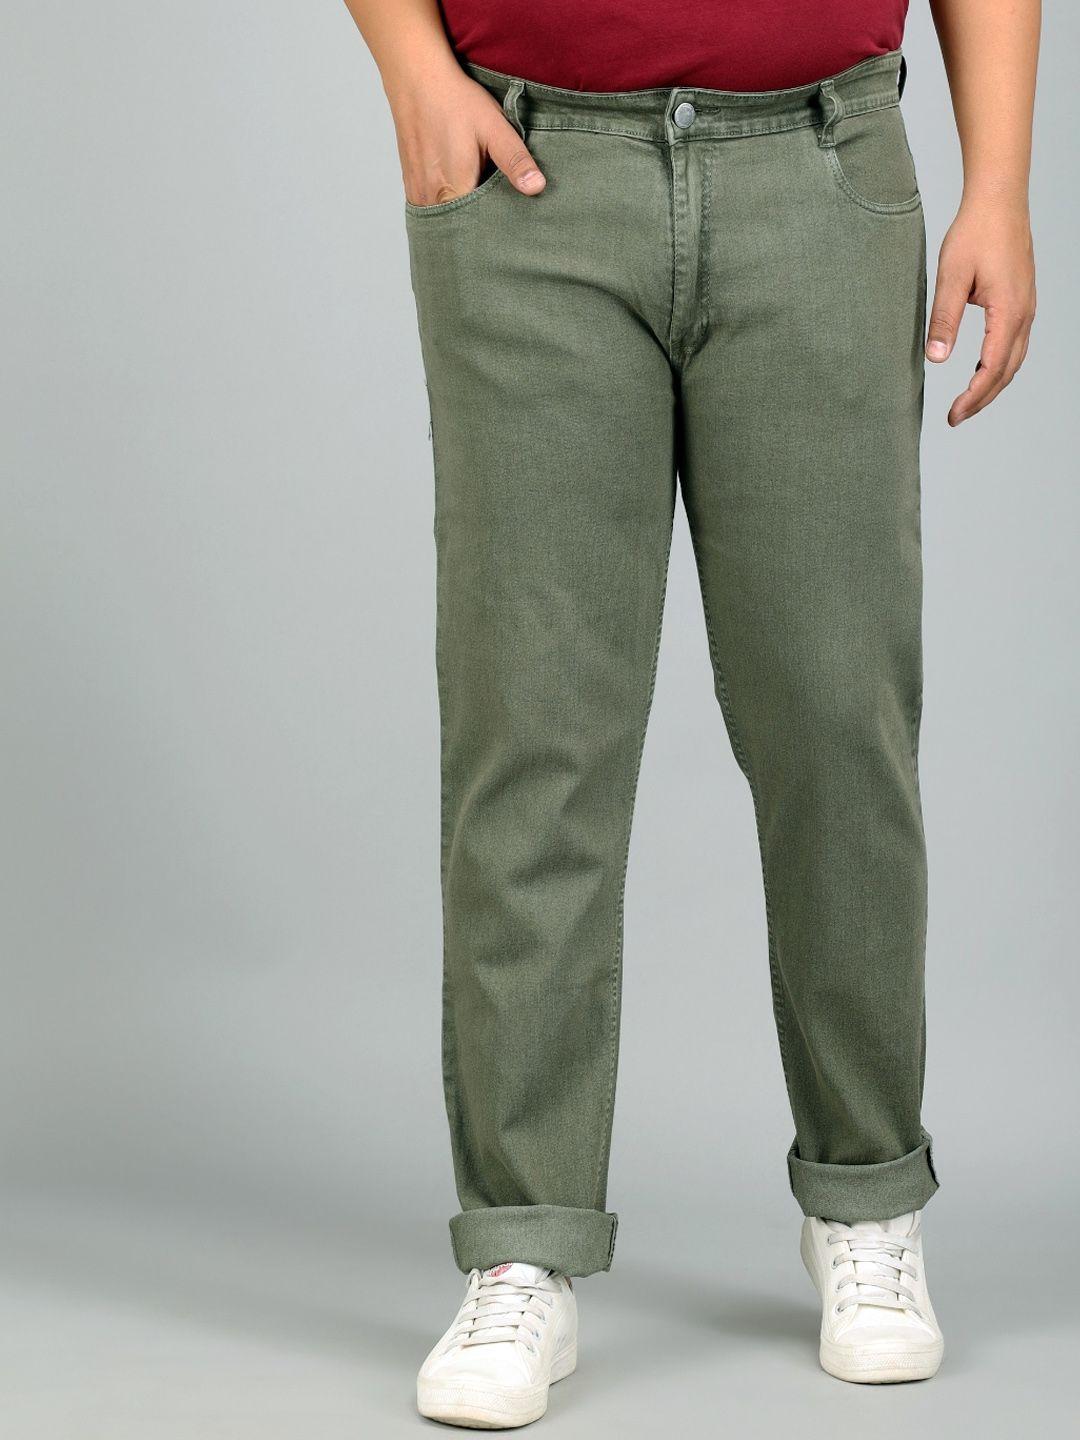 studio nexx men olive green relaxed fit stretchable jeans